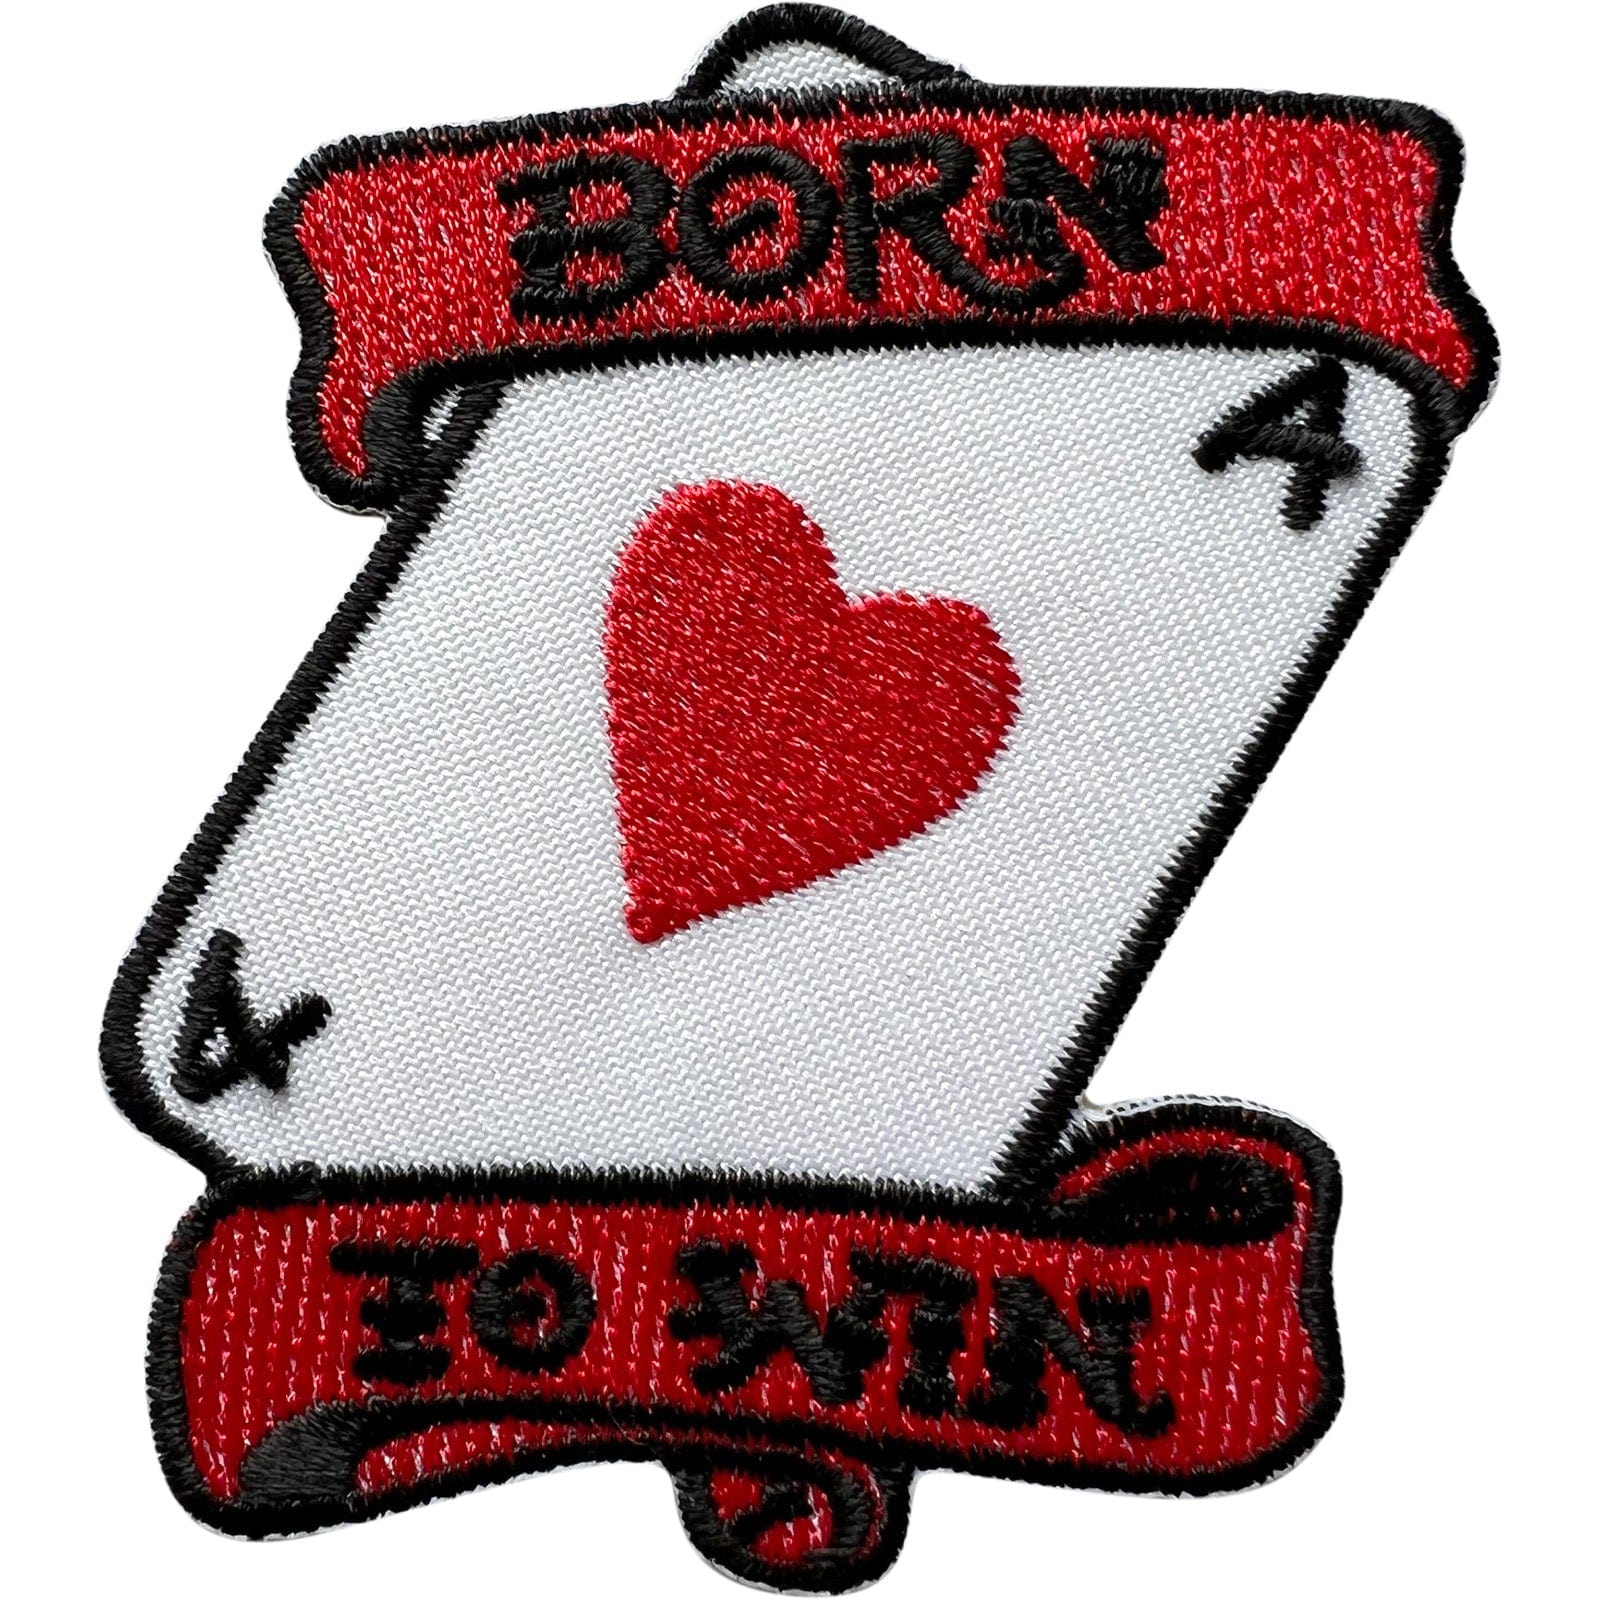 Born in the USA - Embroidered Iron On Patch at Sticker Shoppe